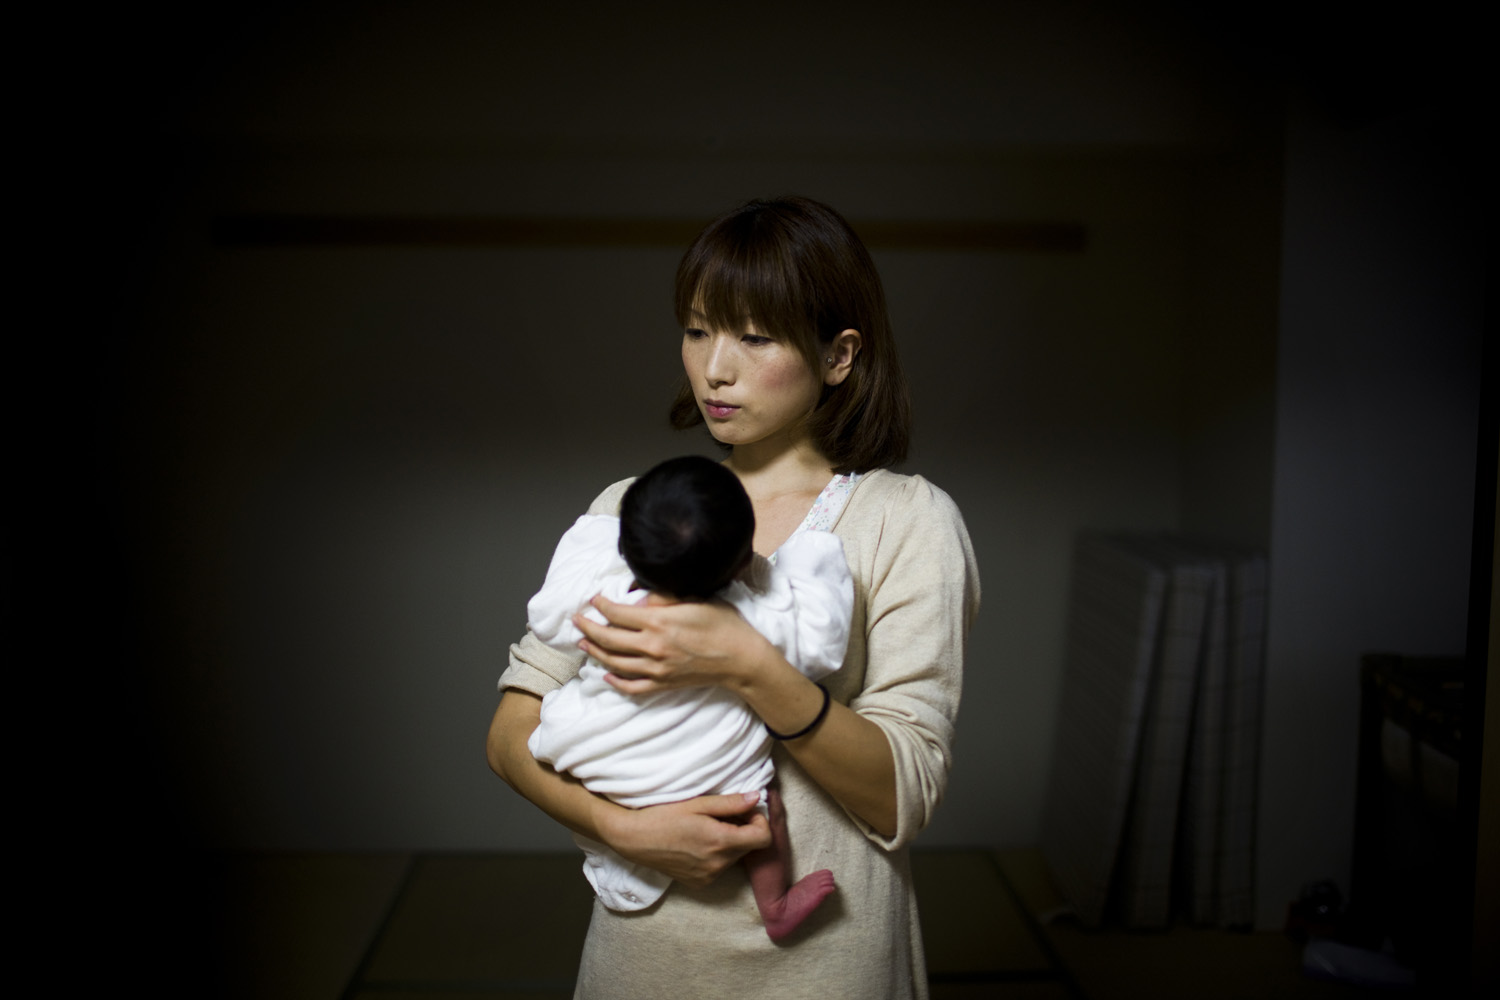 Japan, Tokyo, 2011. Sachiko Masuyama holds her newborn baby in her home in Shinonome, Tokyo. She relocated to Tokyo after evacuating her previous home near the damaged Fukushima Daiichi Nuclear Power Station. She discovered she was pregnant two days before the earthquake and tsunami hit the northeastern coast of Japan.